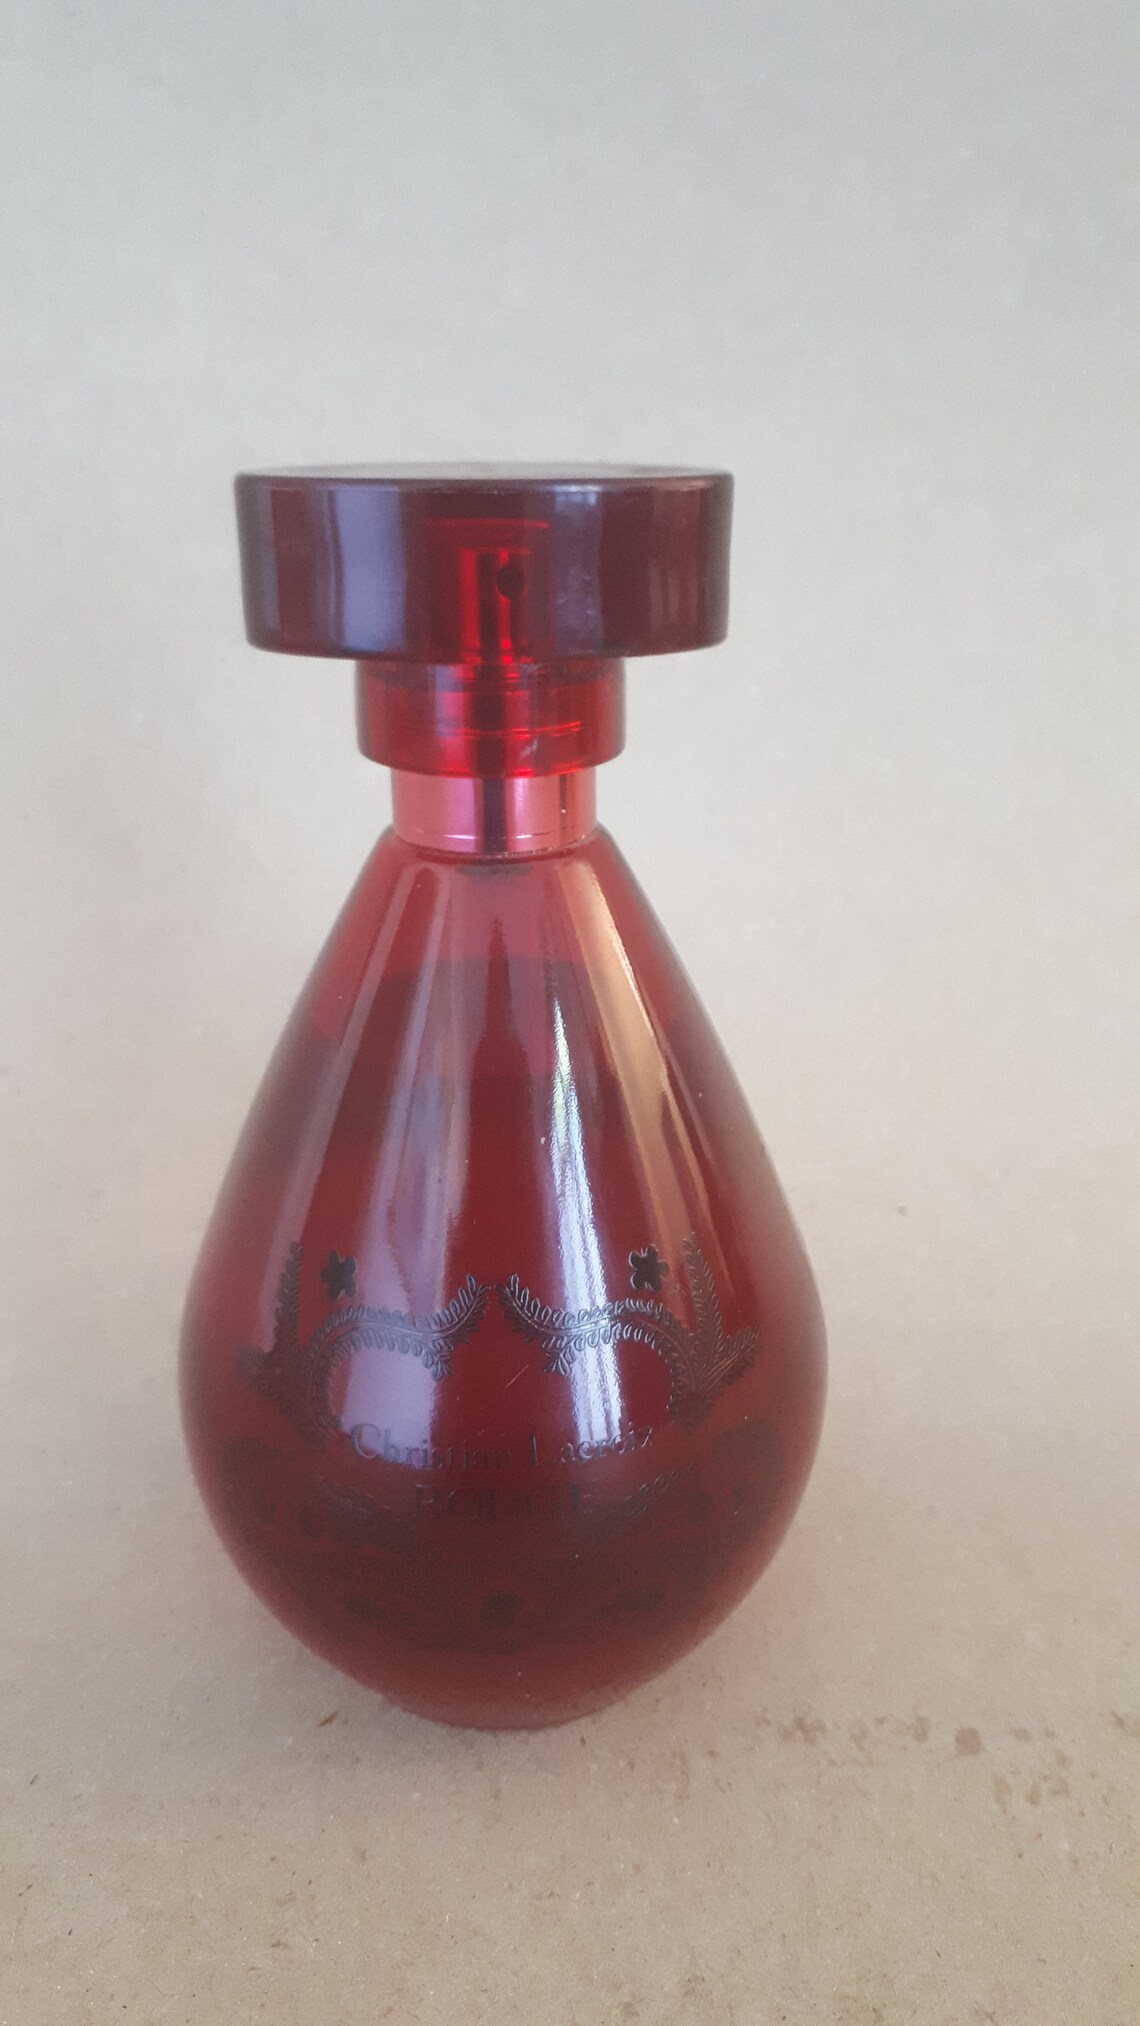 A vintage perfume rouge by Christian la Croix edp 50ml used | Etsy